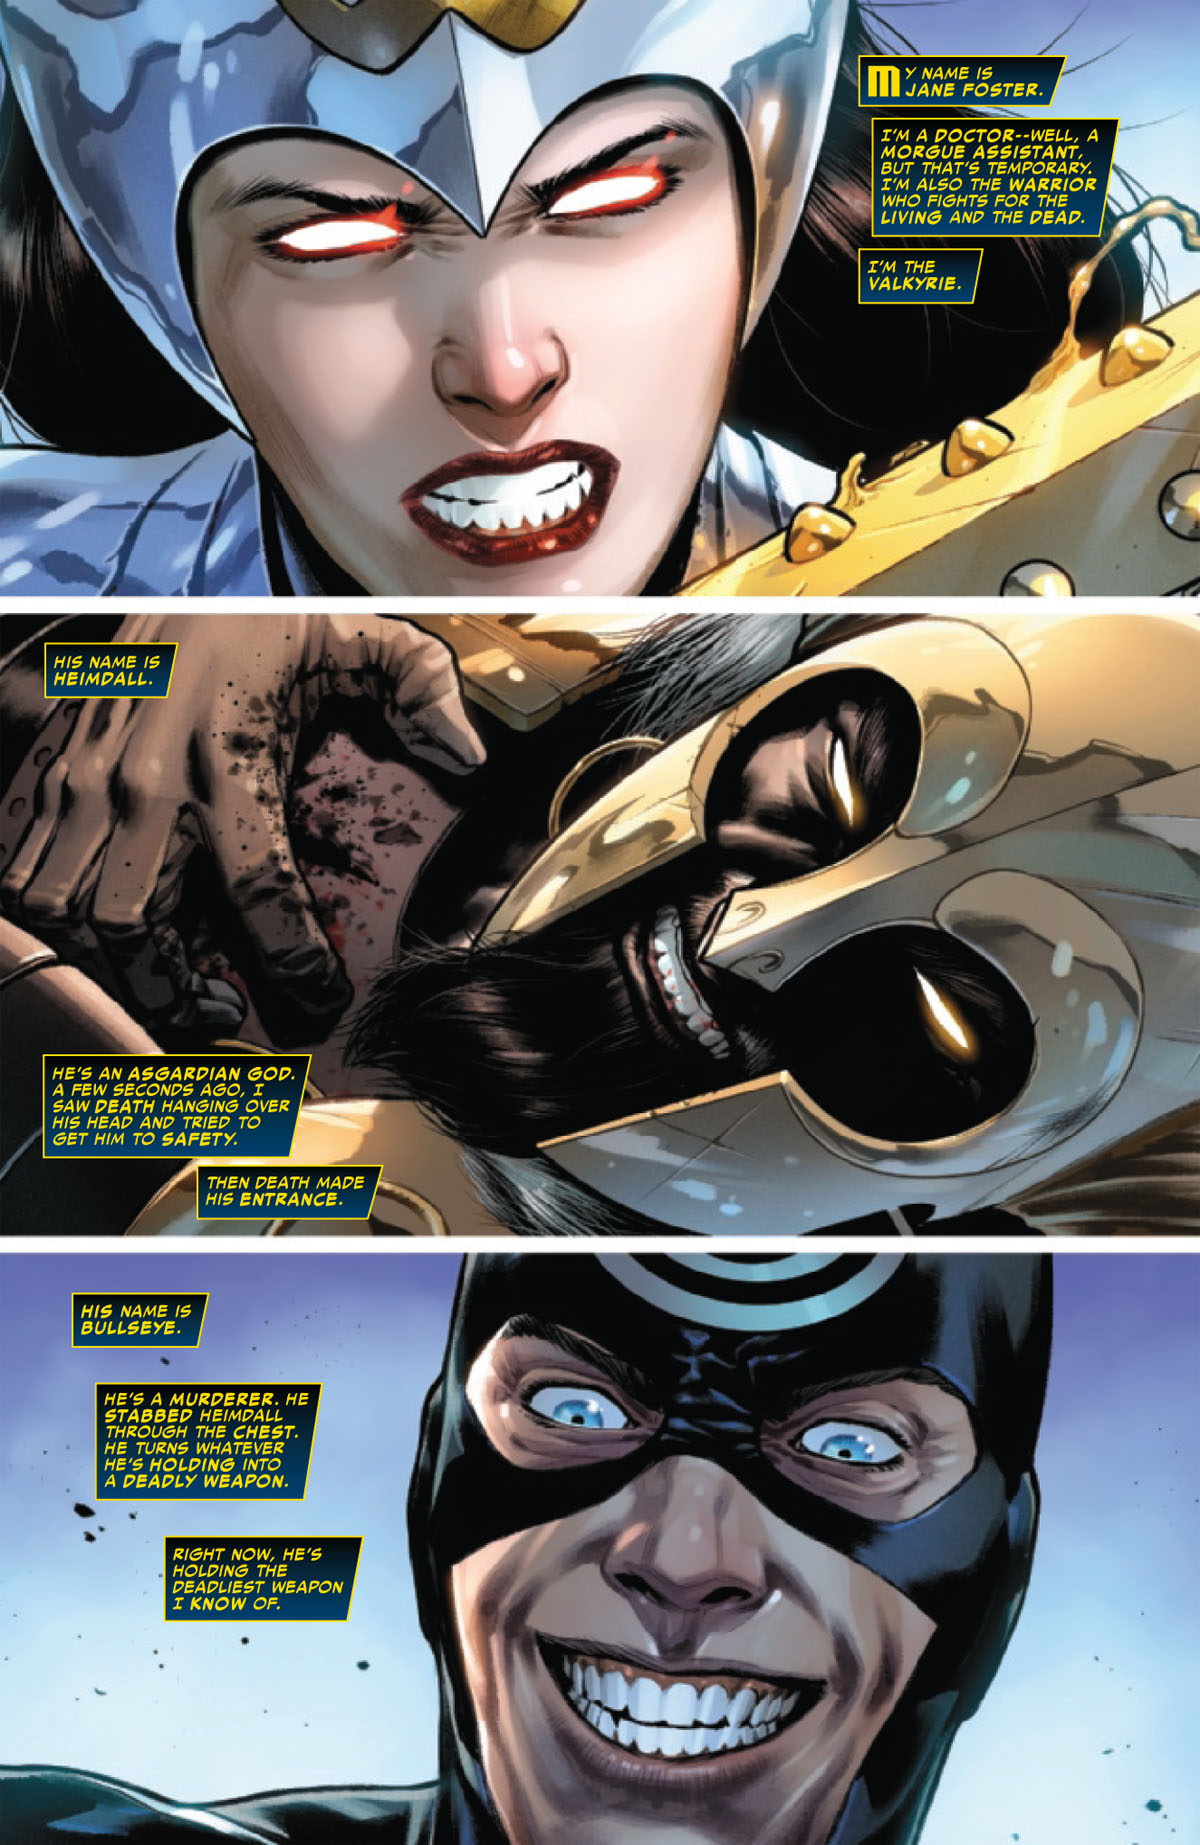 Valkyrie: Jane Foster #2 page 1